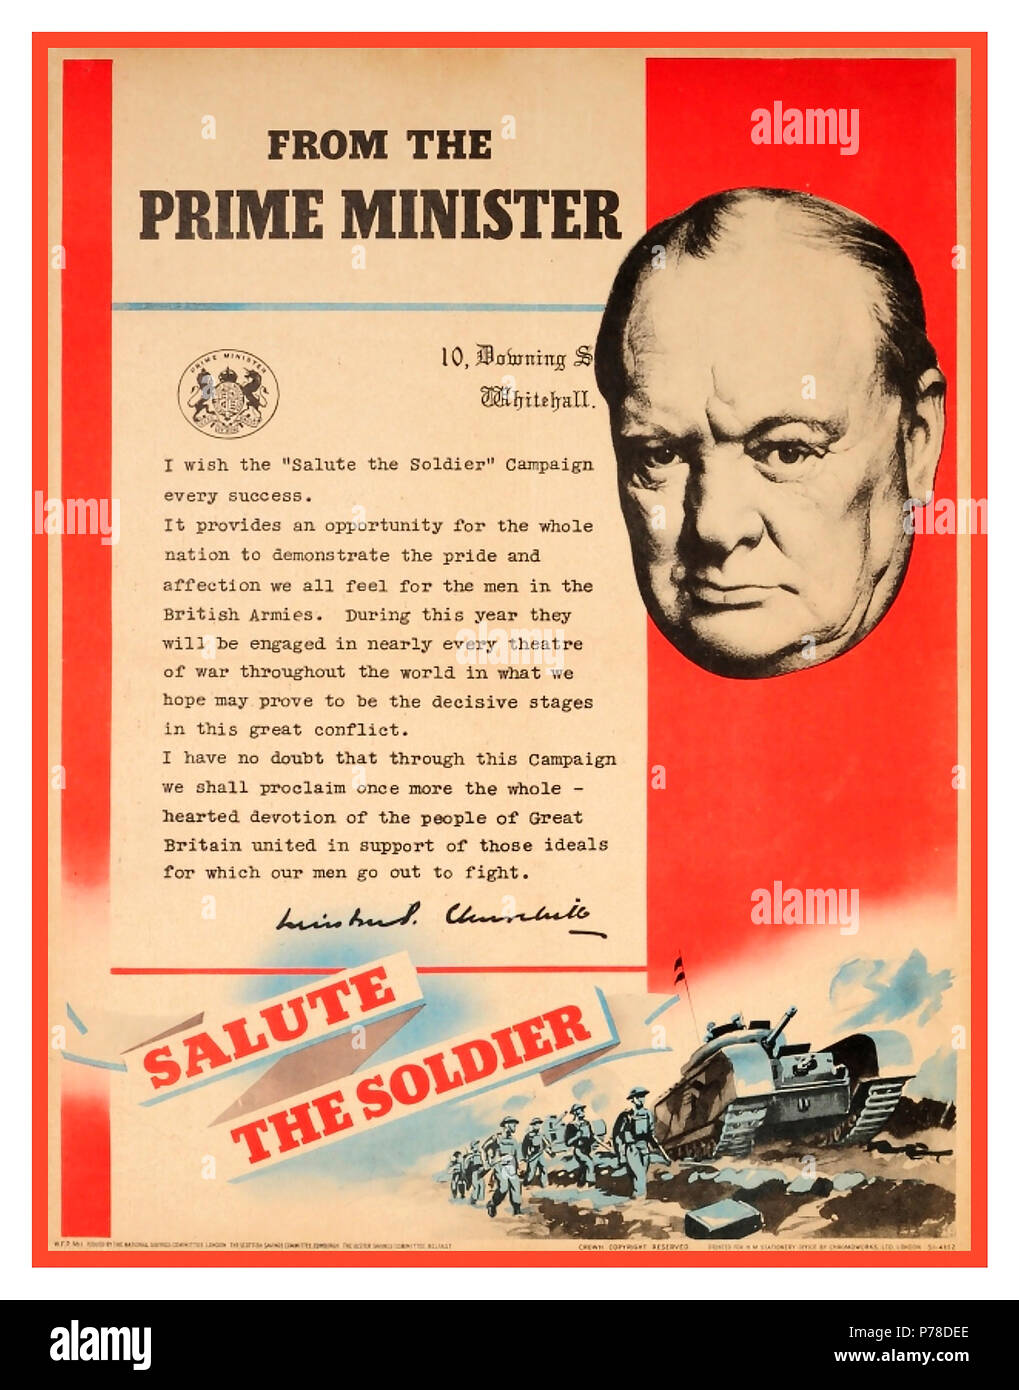 Vintage 1940's World War Two poster featuring a letter from the Prime Minister Winston Churchill -' I wish the Salute the Soldier campaign every success...' featuring an image of Winston Churchill (1874-1965) next to a copy of his letter from 10 Downing Street Whitehall with an image below of British Army soldiers in uniform and carrying their rifle guns marching in fields next to a tank with a 'Salute the Soldier' banner. The Salute the Soldier week was a national war savings campaign to raise funds for  military equipment to support men fighting the war. Stock Photo